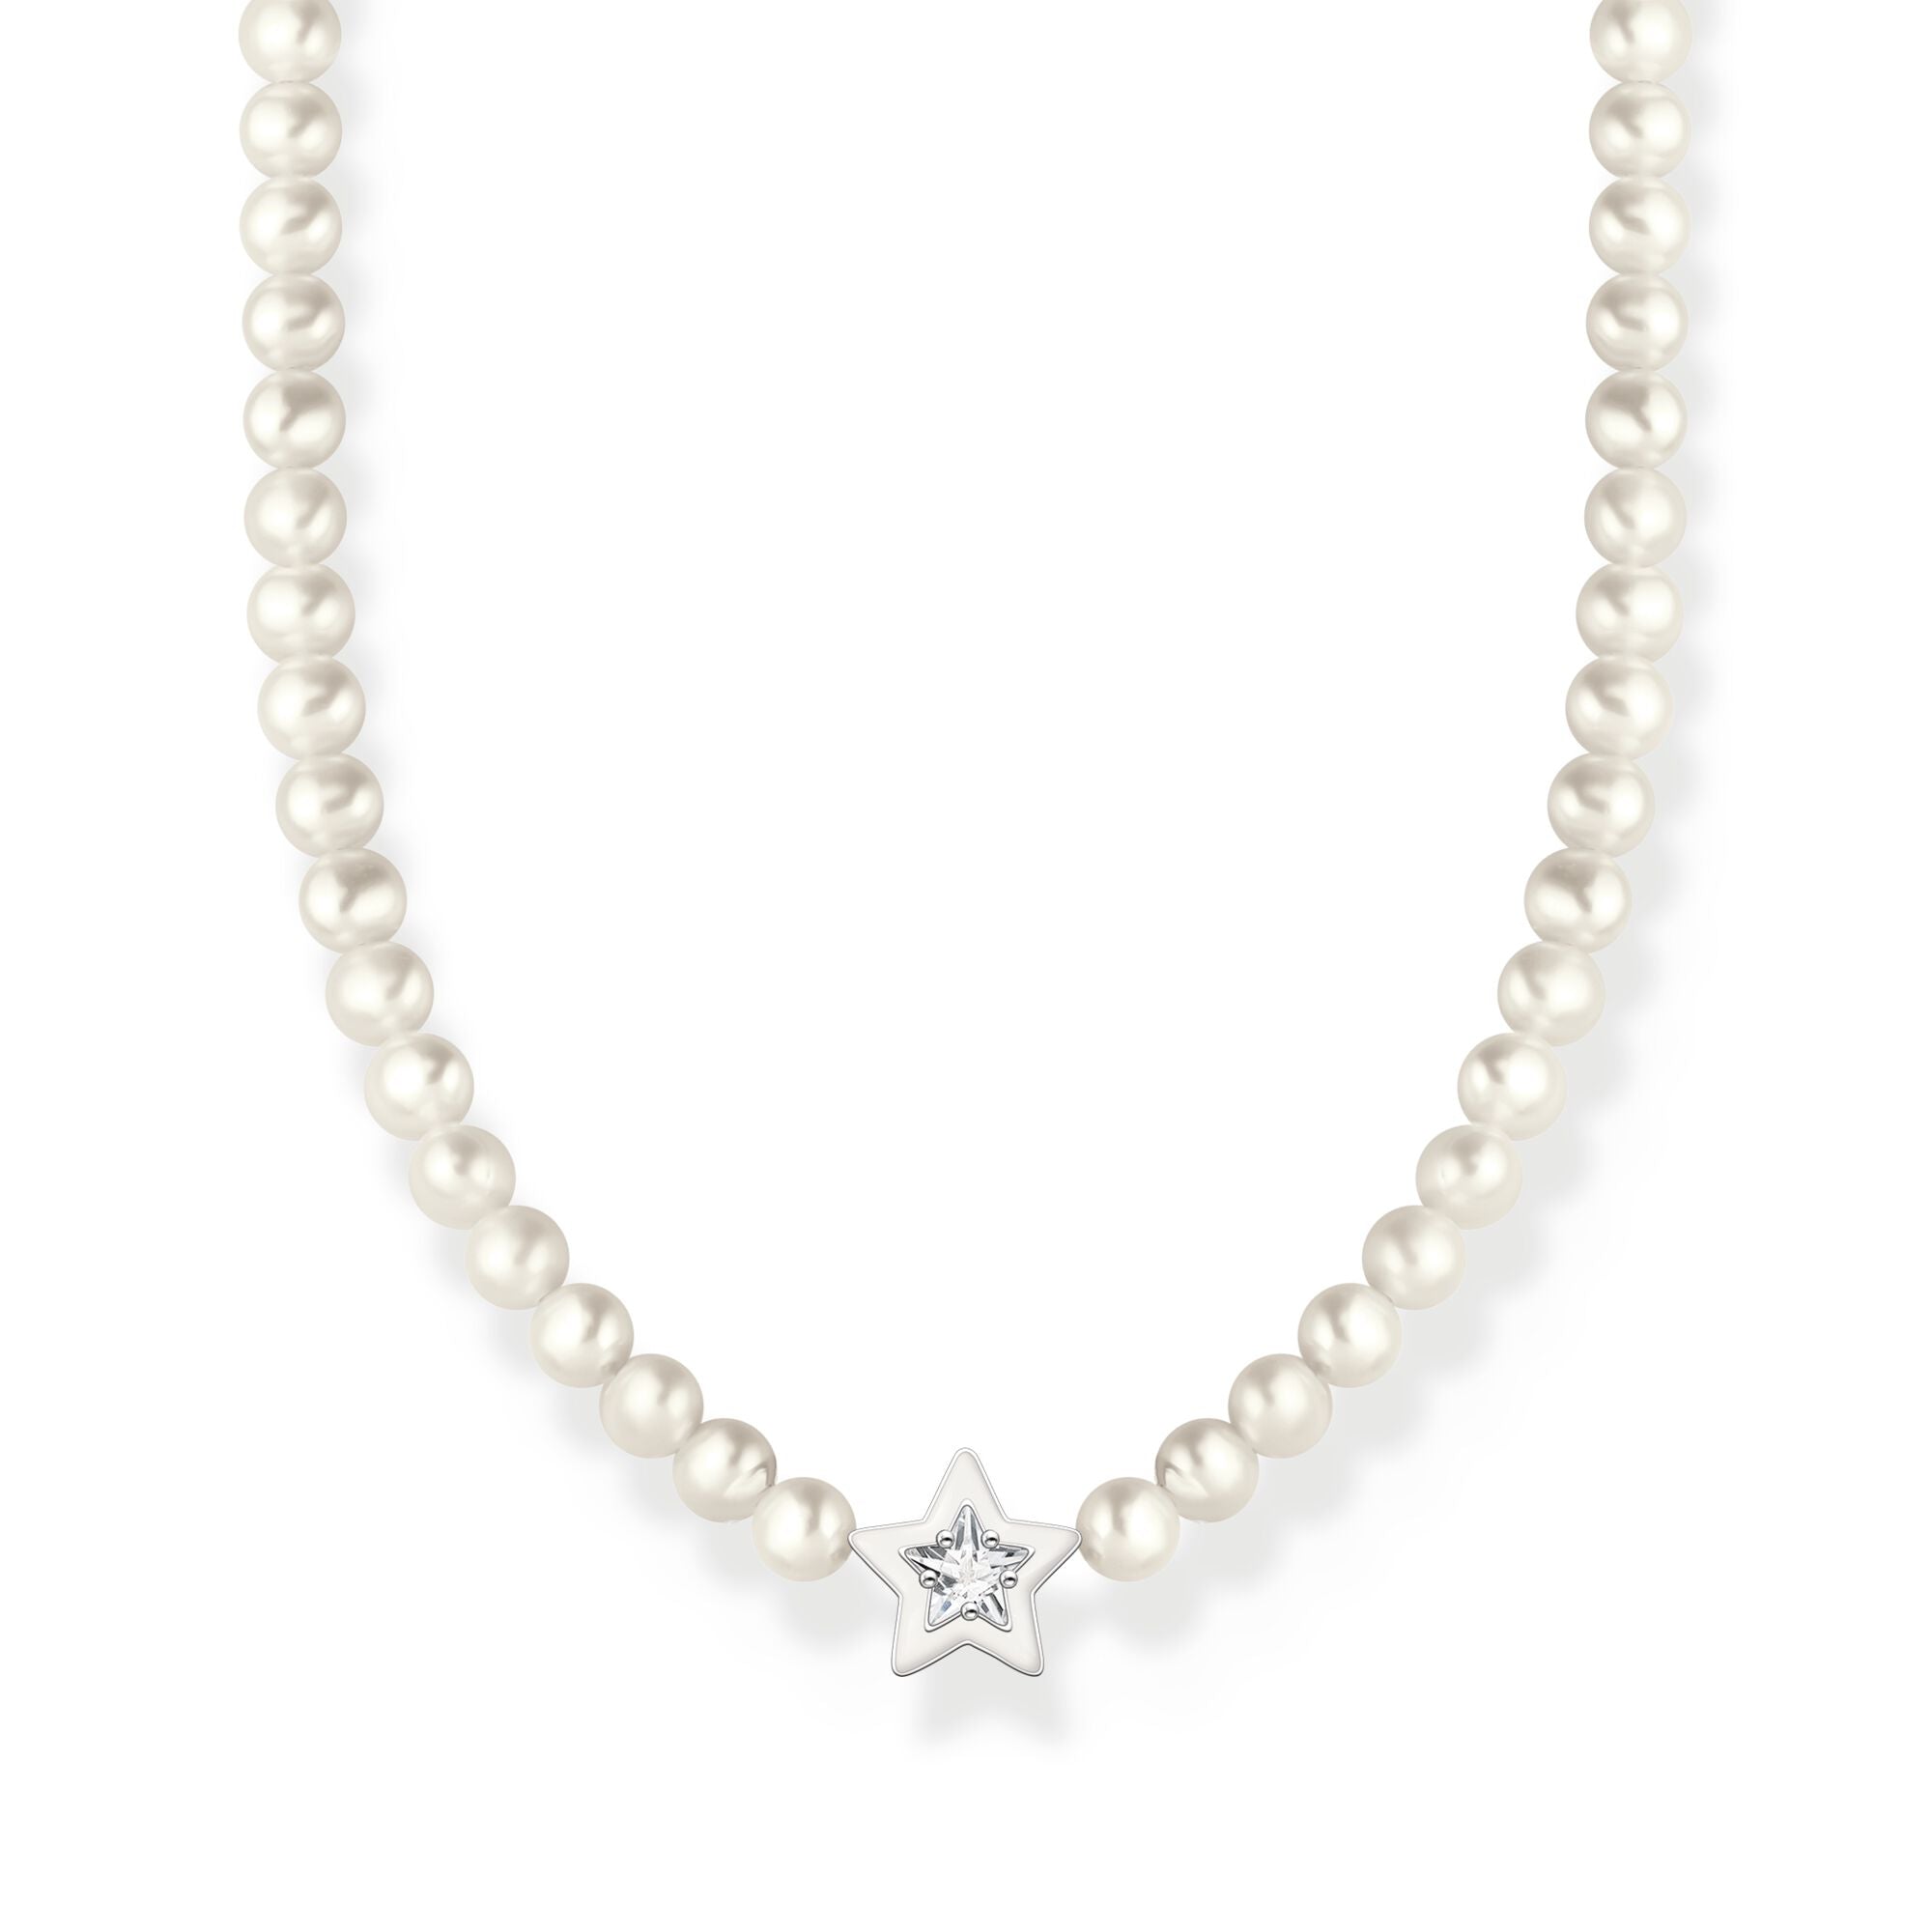 Thomas Sabo Freshwater Pearl Charm Necklace